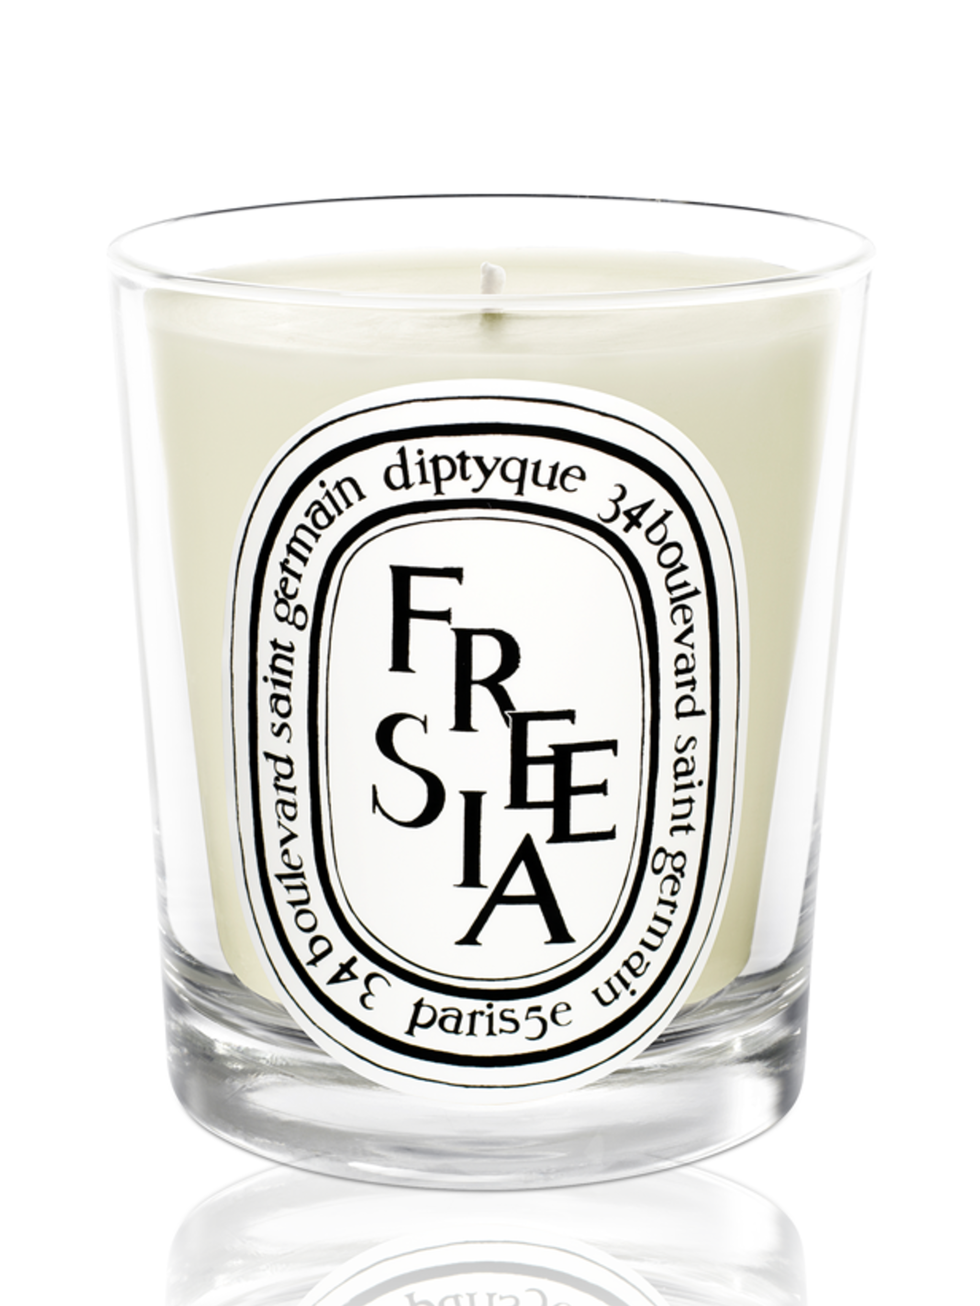 <p>Candle in Freesia, £35 by Diptyque at <a href="http://www.spacenk.co.uk/product/code/101794832.do?showPrevNext=false">Space NK</a></p><p>This is Kates must-have candle brand. And the scent? She loves Freesia which is light and floral with a spicy edge